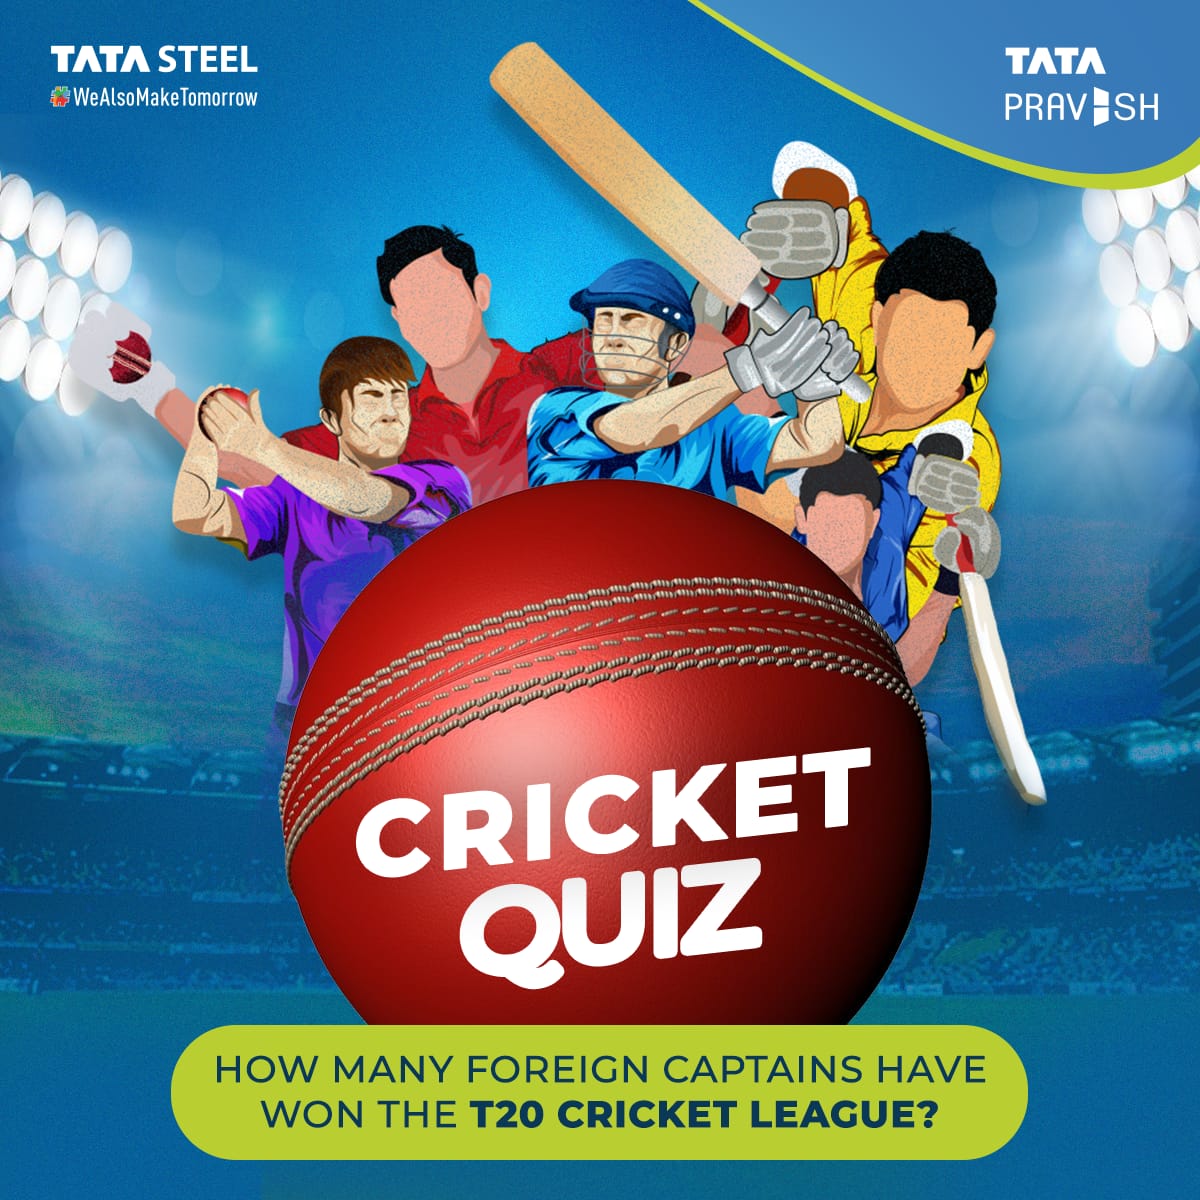 Get ready for Round 2! Cricket buffs, it's your time to shine! Put your knowledge to the test with Tata Pravesh and stand a chance to win amazing rewards! . . #TataPravesh #AkelaHiKaafiHai #CricketQuiz #ShowYourKnowledge #TataPraveshDoors #AHKH #Contest #Challenge #ContestAlert